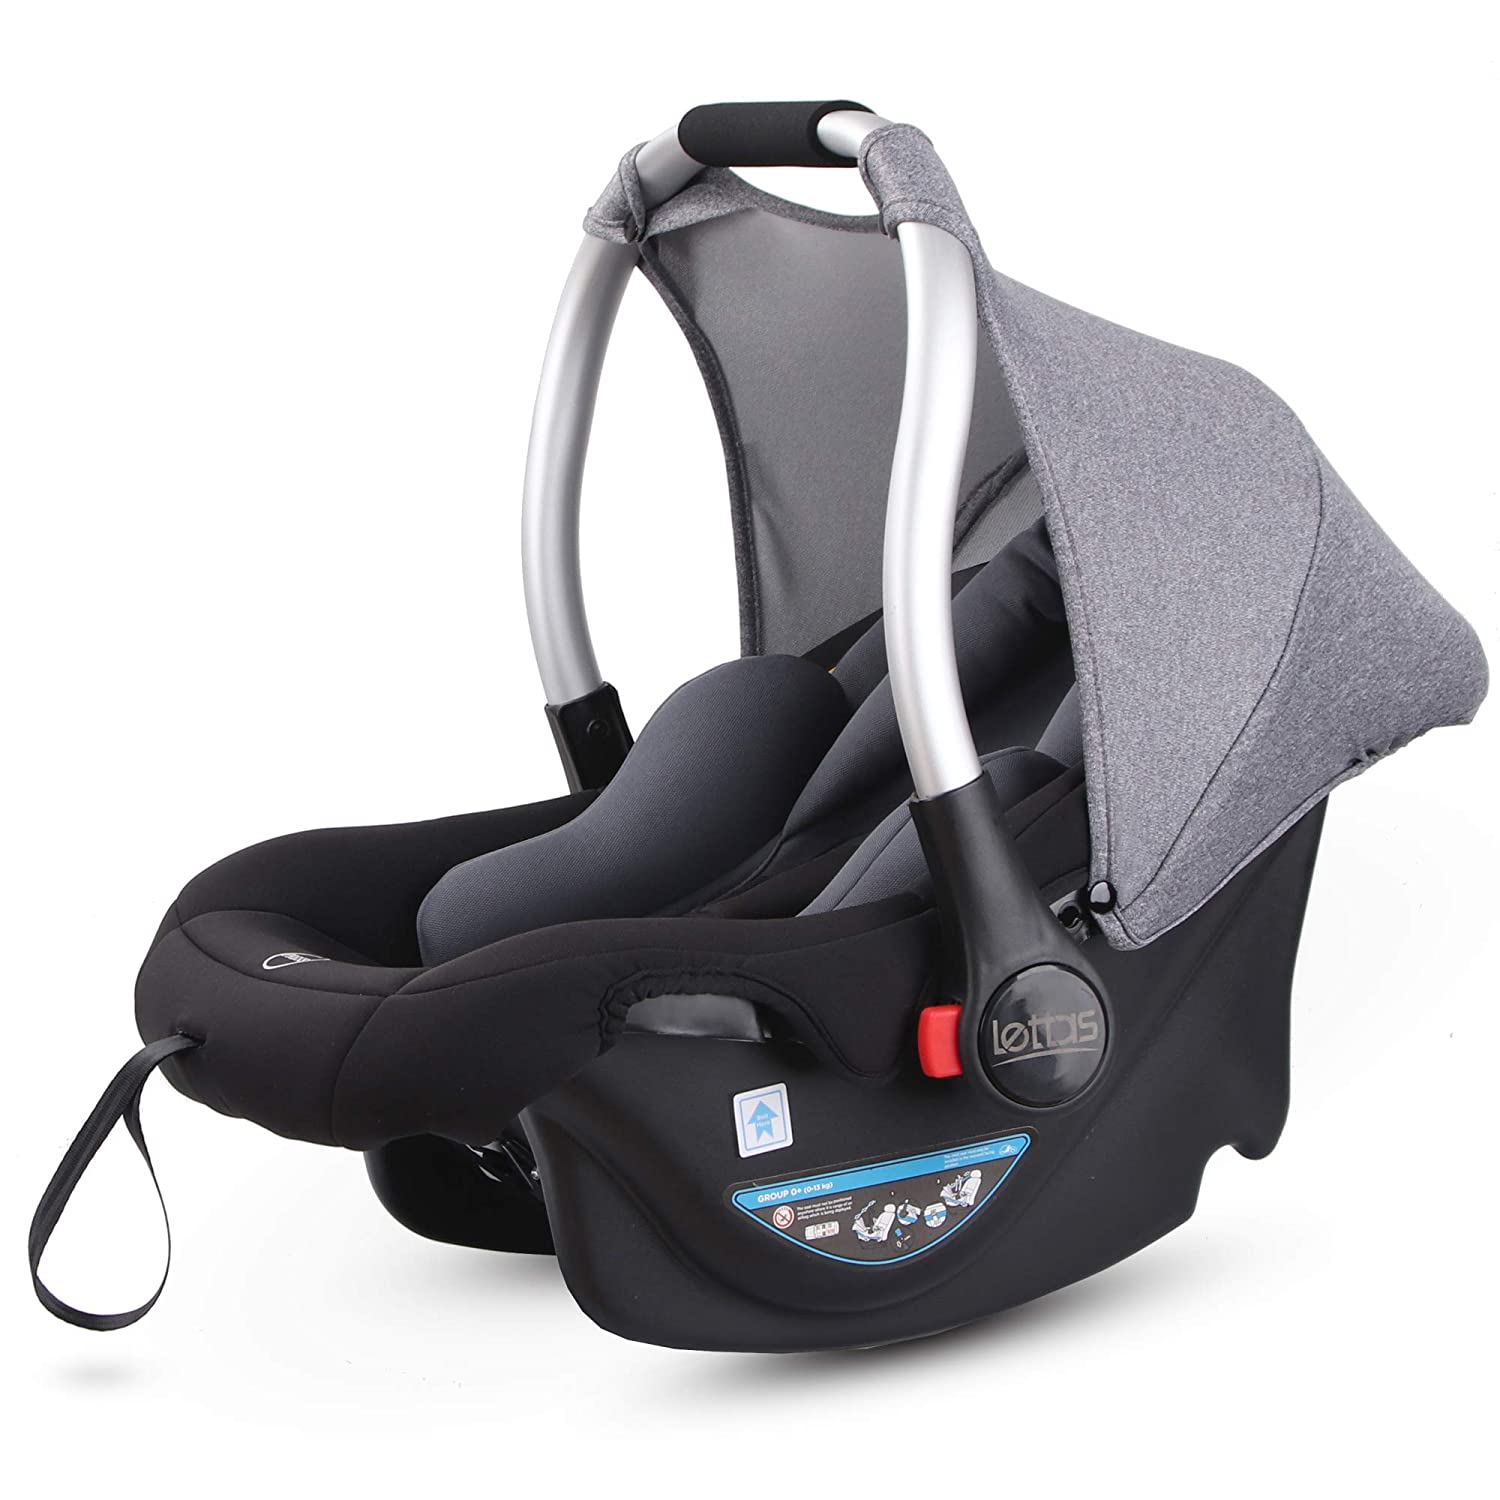 LETTAS Baby Car Seat with Sun Canopy Group 0+ Child Seat (0-13 kg) Suitable from Birth to Approx. 12 Months ECE-R 44/04